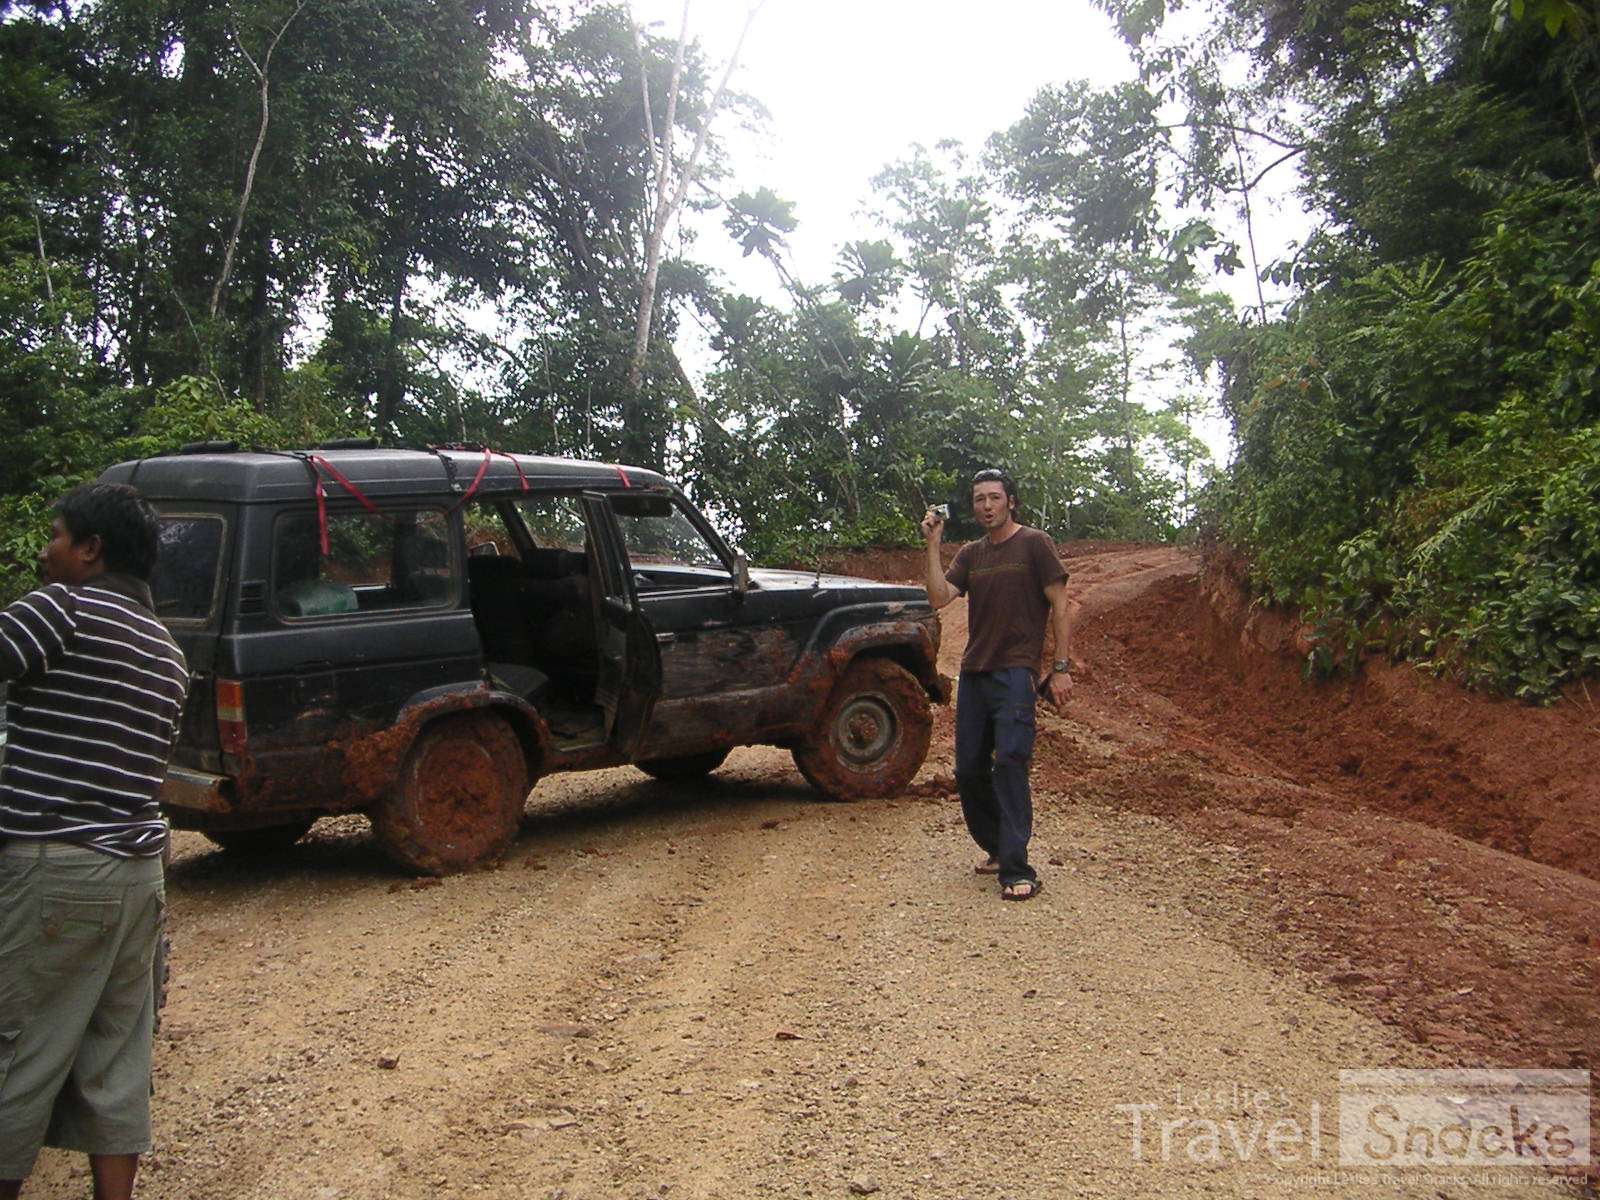 On our way to San Blas, our truck got stuck in the mud off the side of the road.